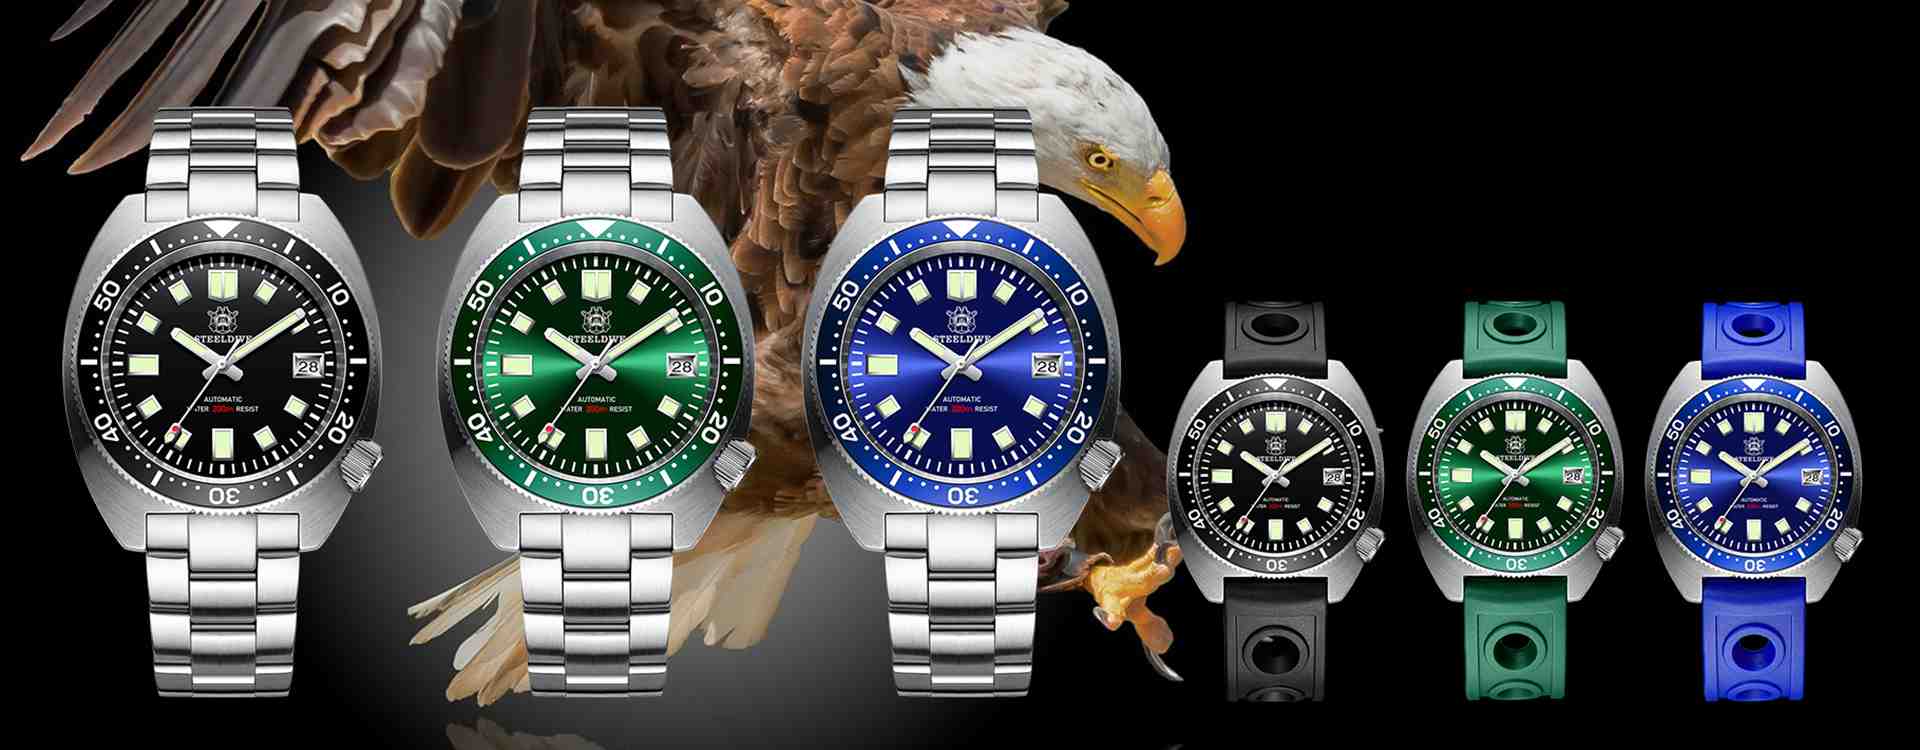 Affordable Steeldive Watches: A Blend of Quality and Value